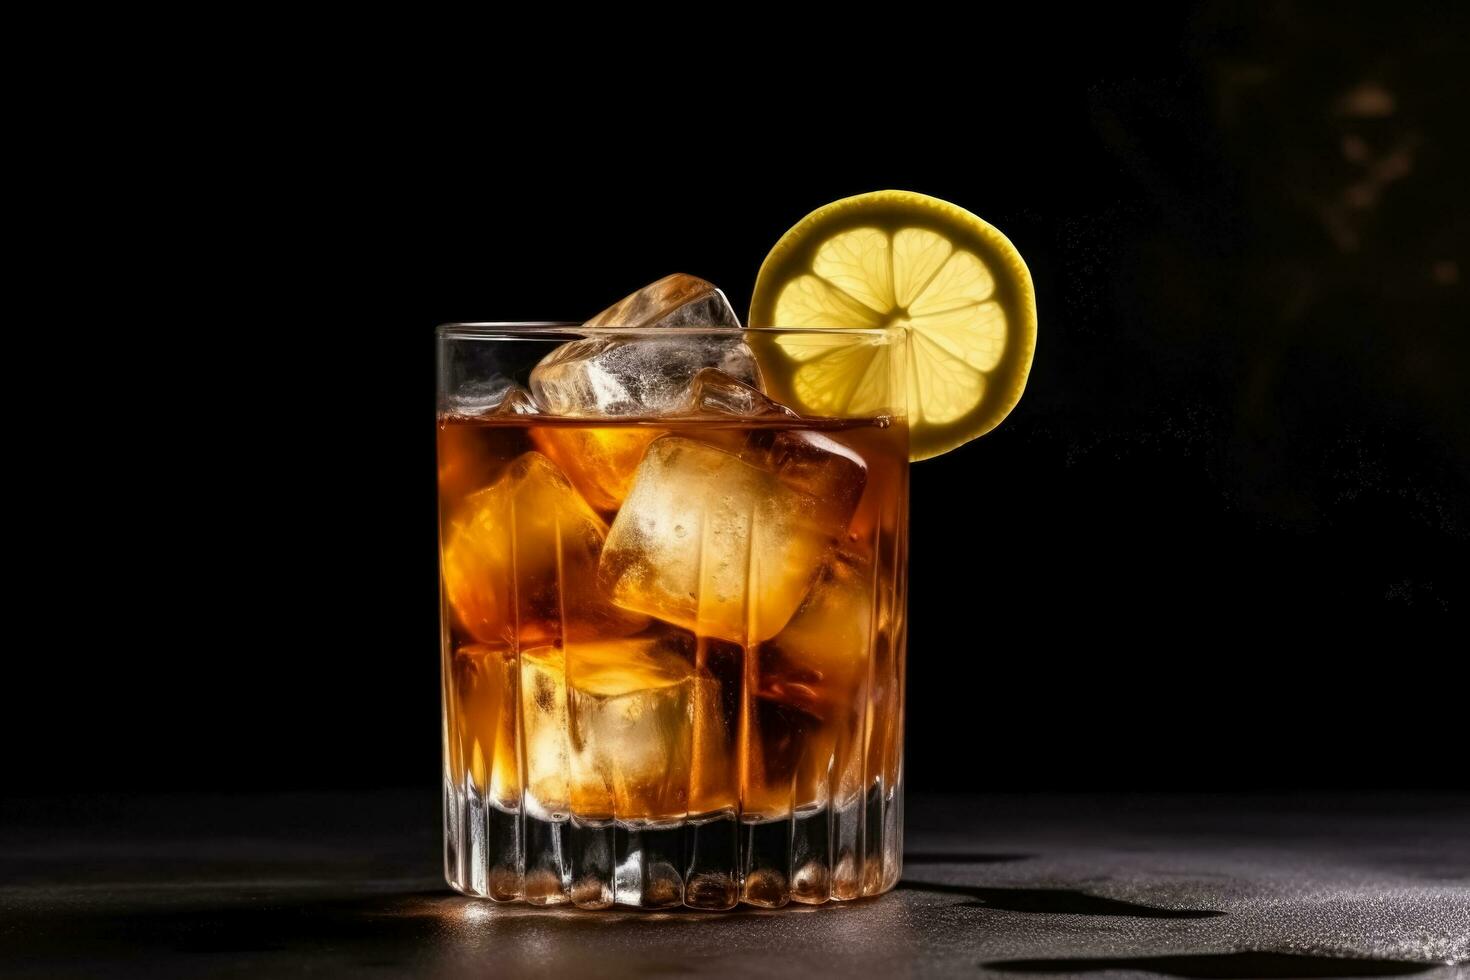 fresh dark 'n stormy cocktail dark background with empty space for text photo